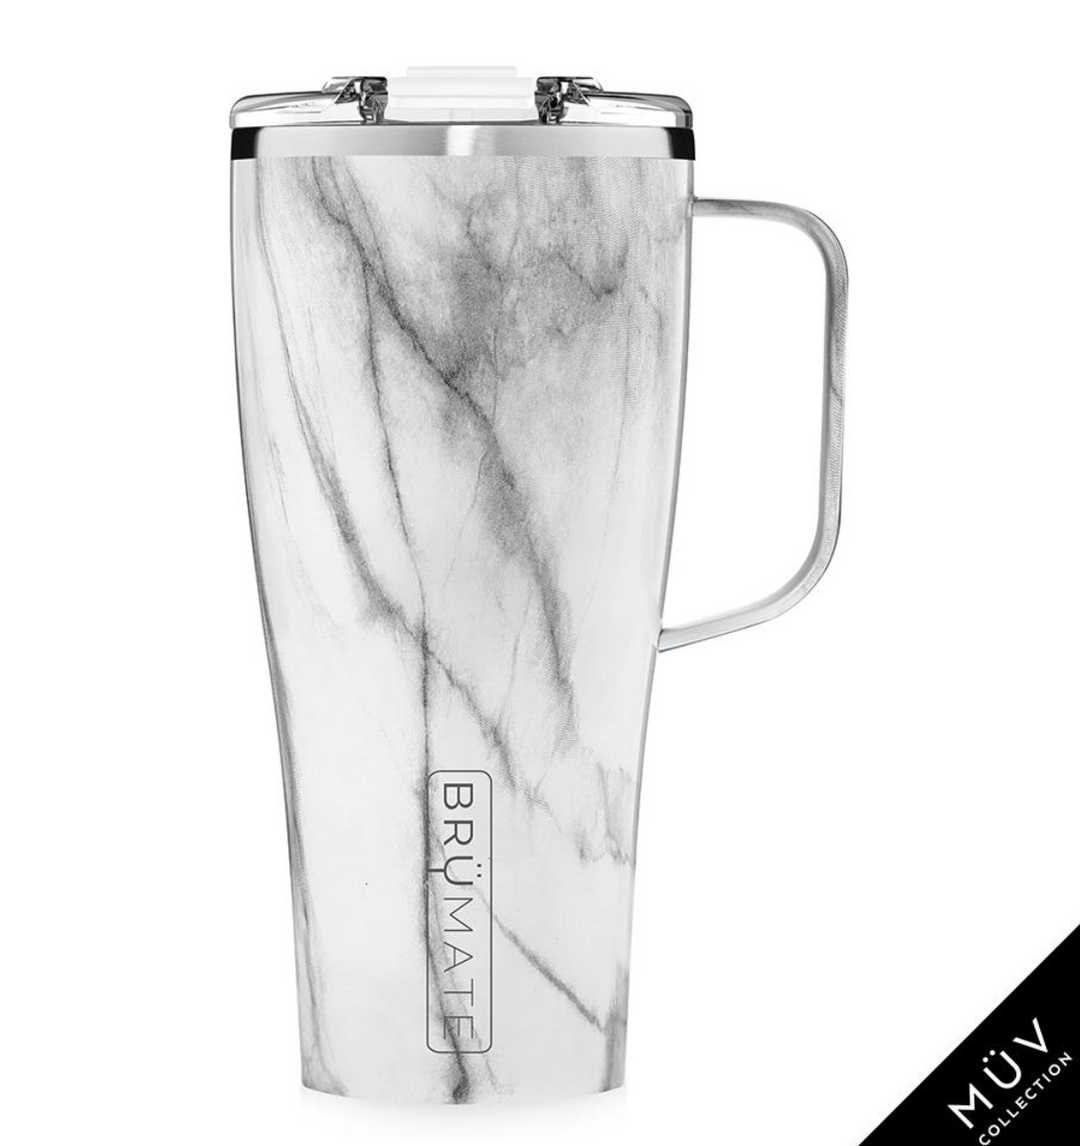 Toddy XL 32oz Insulated Mug in Ice White